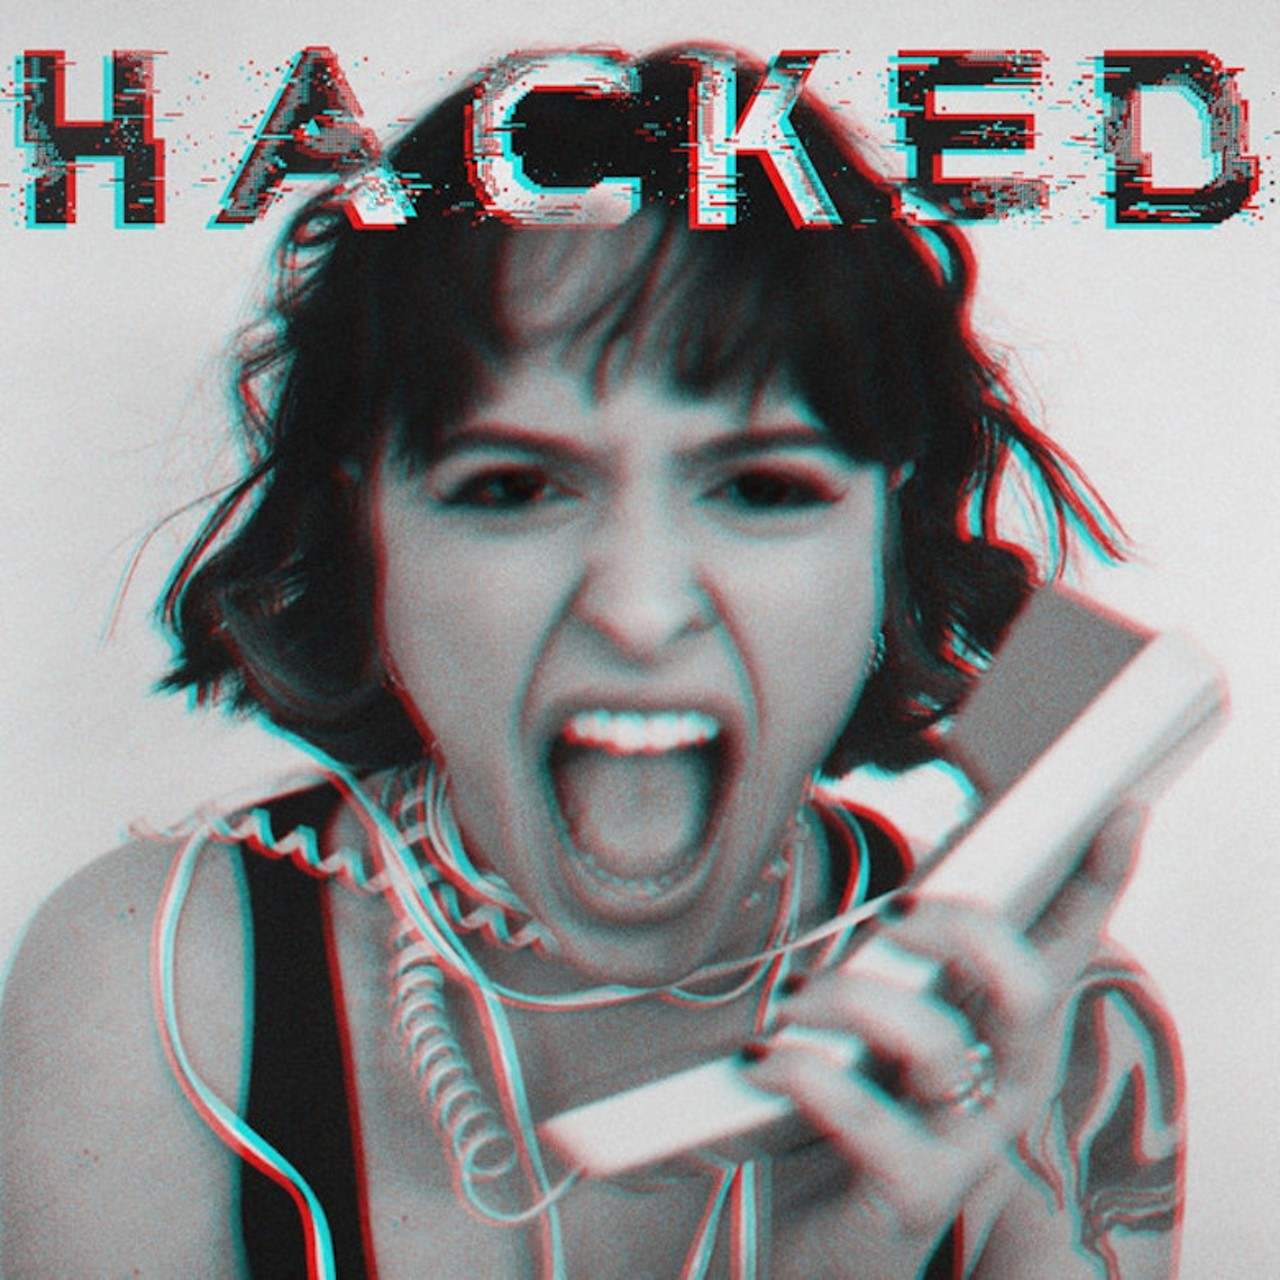 Sam Brenzel
HACKED
When anxiety reaches an all-time high and intrusive thoughts multiply in your mind, it can feel as though something, or someone else, is taking control. These are the unseen forces Sam Brenzel evokes and addresses head-on in the captivating lead single from her debut EP, Scorpio Moon. &#147;HACKED&#148; finds the narrator gradually losing grip on her own psyche:&#147;Go, go, go / Get out of my head,&#148; she sings to the intruders. Propelled further by a minimal synth hook and glimmering guitar, by the chorus she already knows it&#146;s too late: &#147;My mind&#146;s been hacked.&#148; There is hope in this hauntingly infectious groove that persists, and for Brenzel, music was the means for that profound self-reflection. At the heart of &#147;HACKED&#148; is a sobering reminder that while we can&#146;t always escape our pasts, we may use those times of turbulence to craft something beautiful. &#151;Lara Kinne 
Listen on Spotify